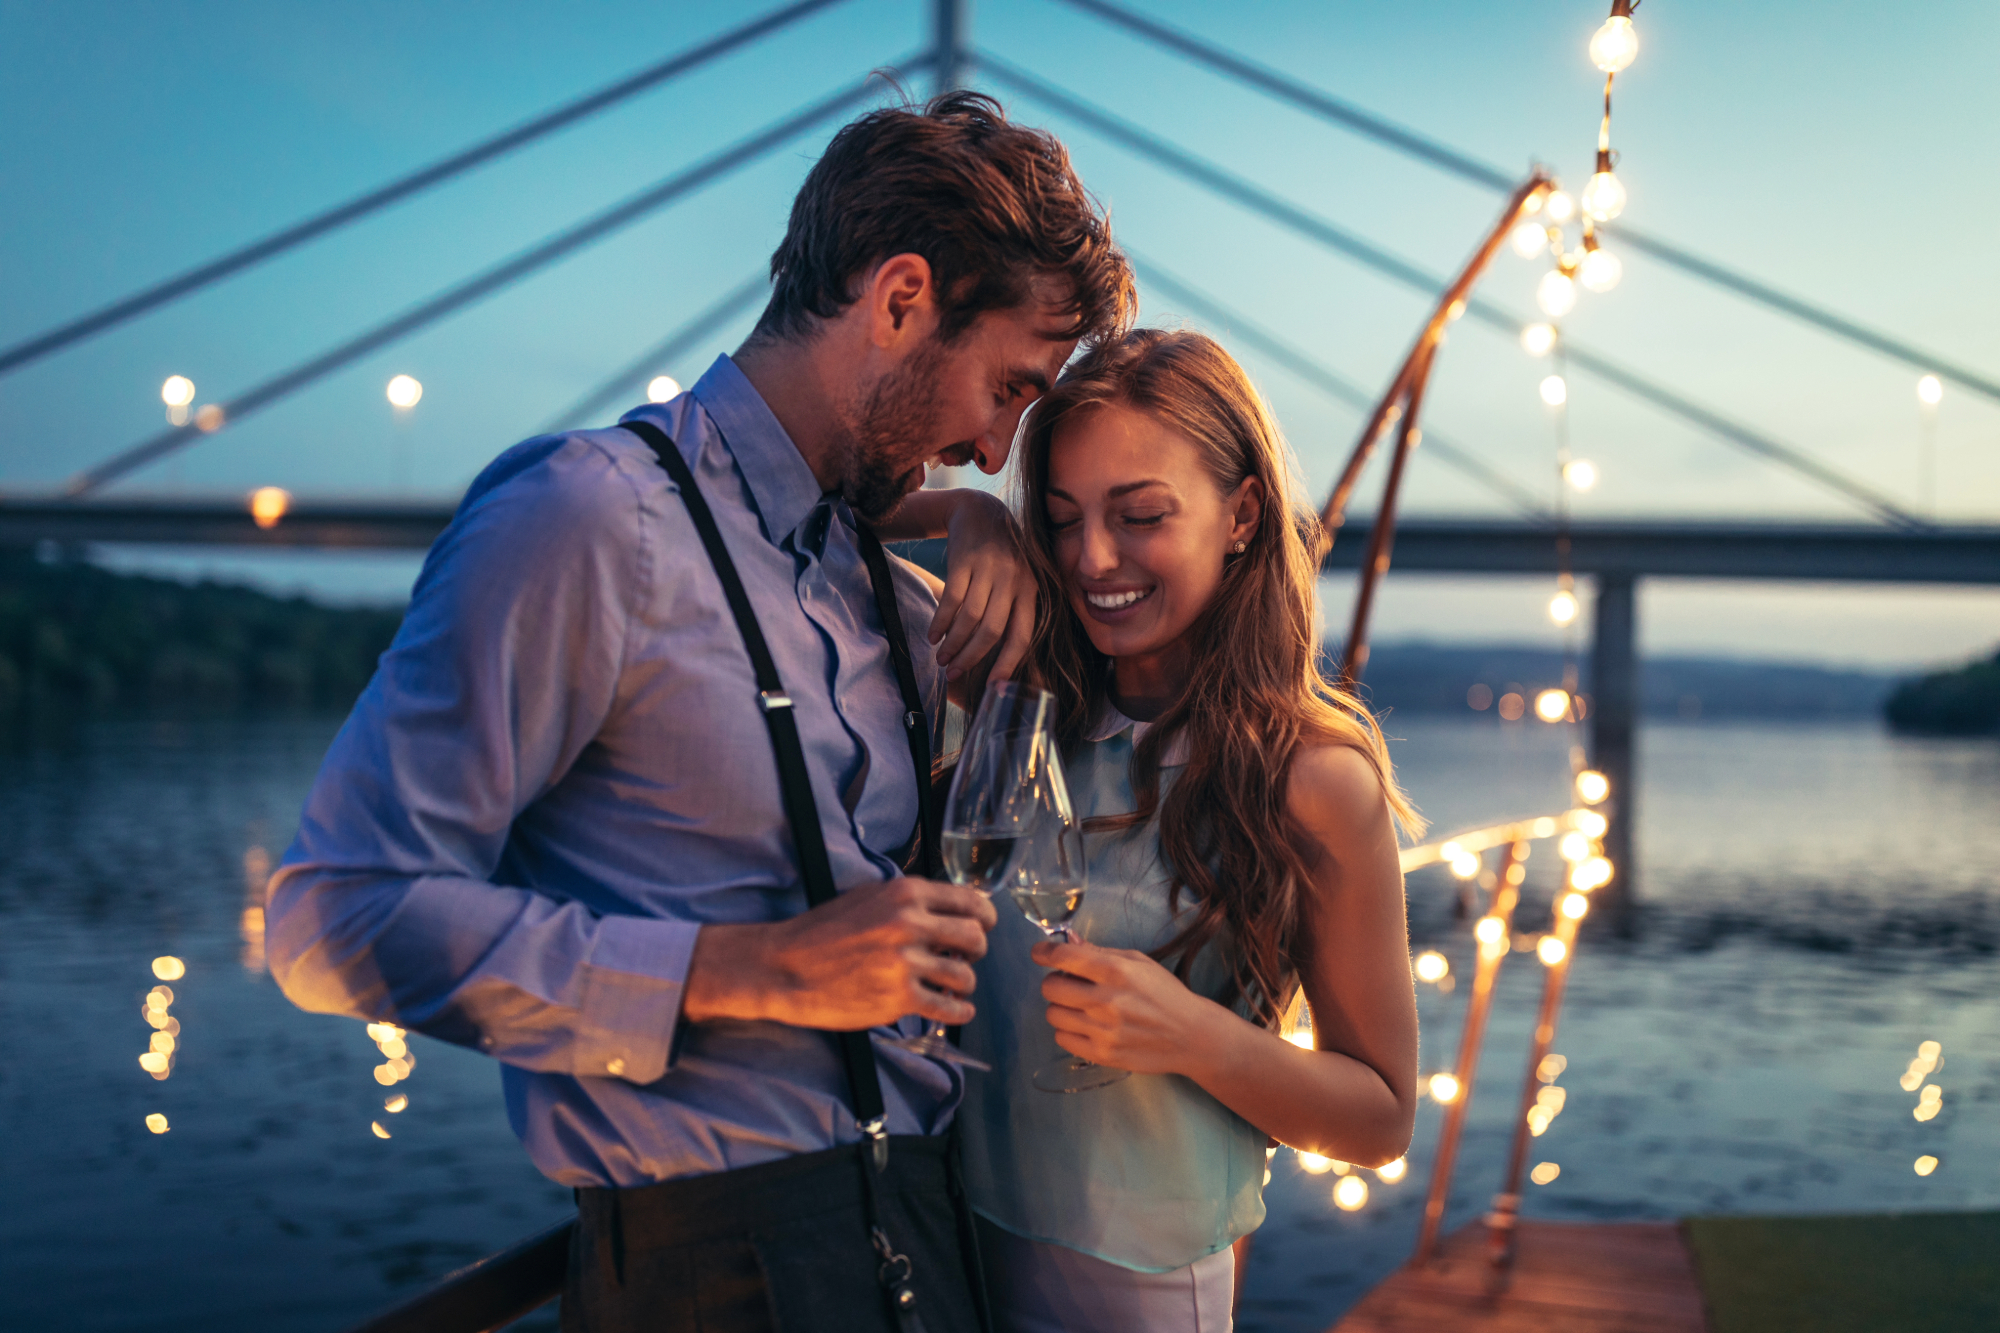 man and woman hugging each other while laughing during the night on a boat